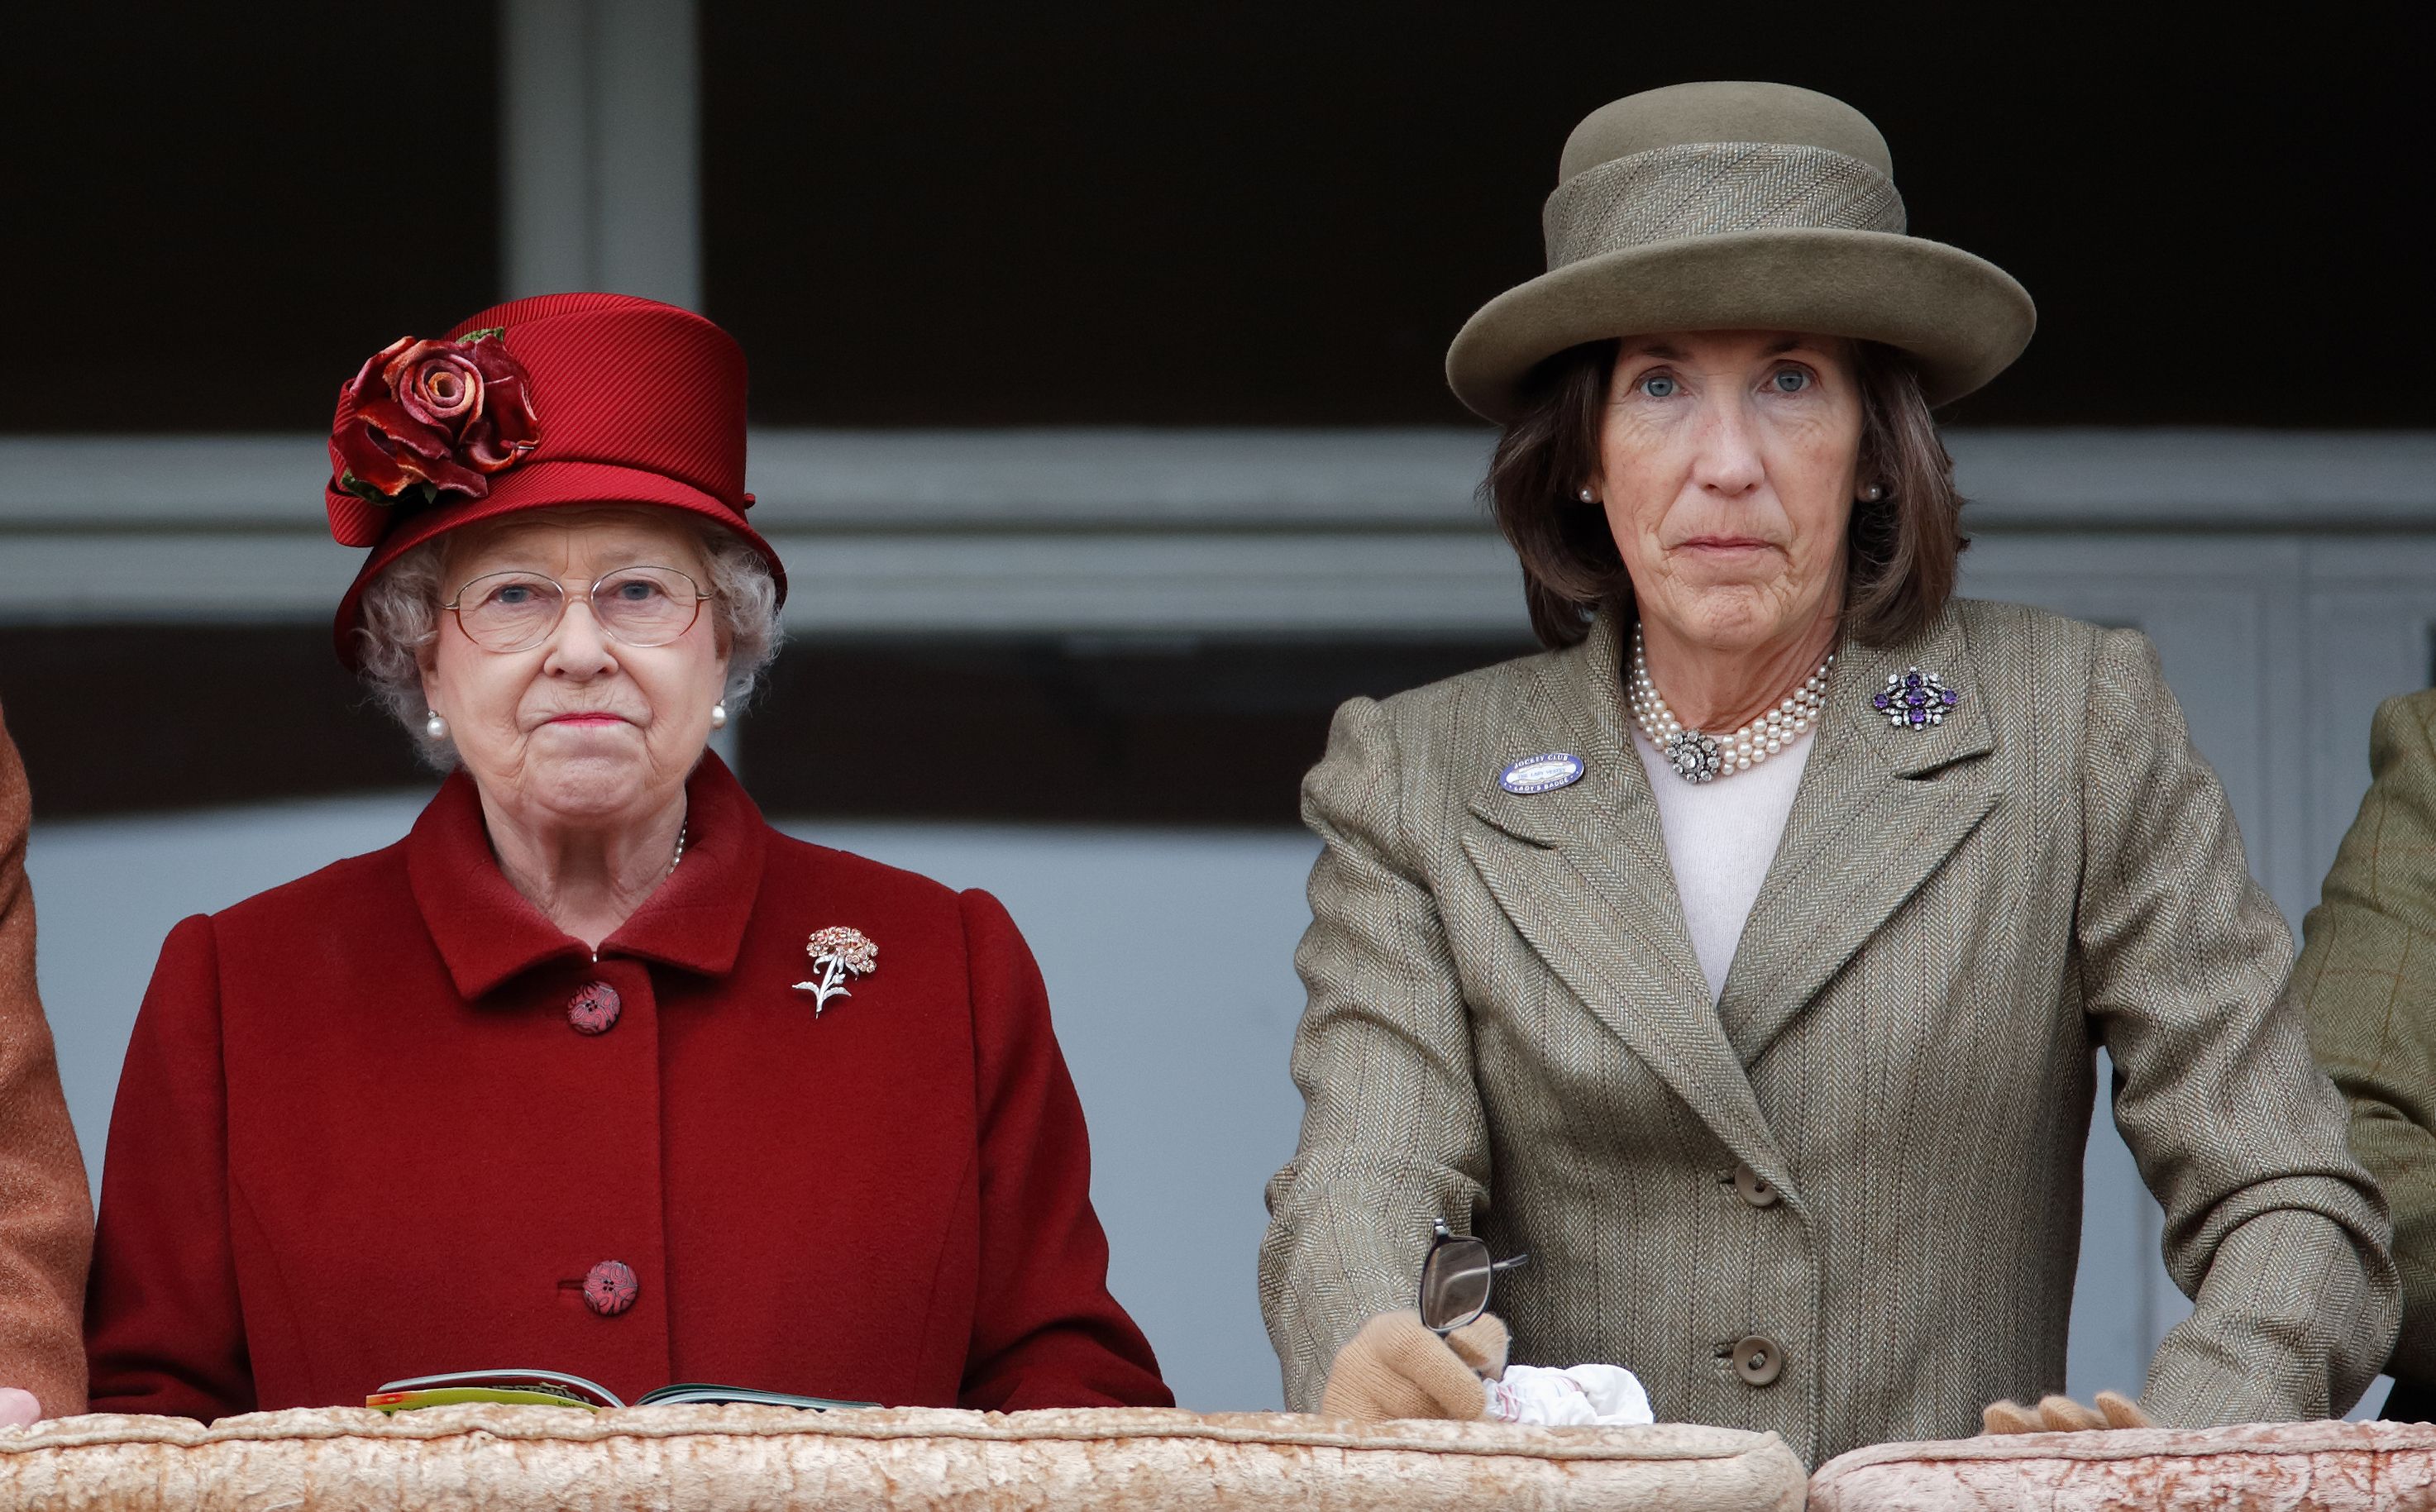 Queen Elizabeth II and Lady Celia Vestey at the "Gold Cup Day" of the Cheltenham Festival on March 13, 2009, in Cheltenham, England | Photo: Max Mumby/Indigo/Getty Images